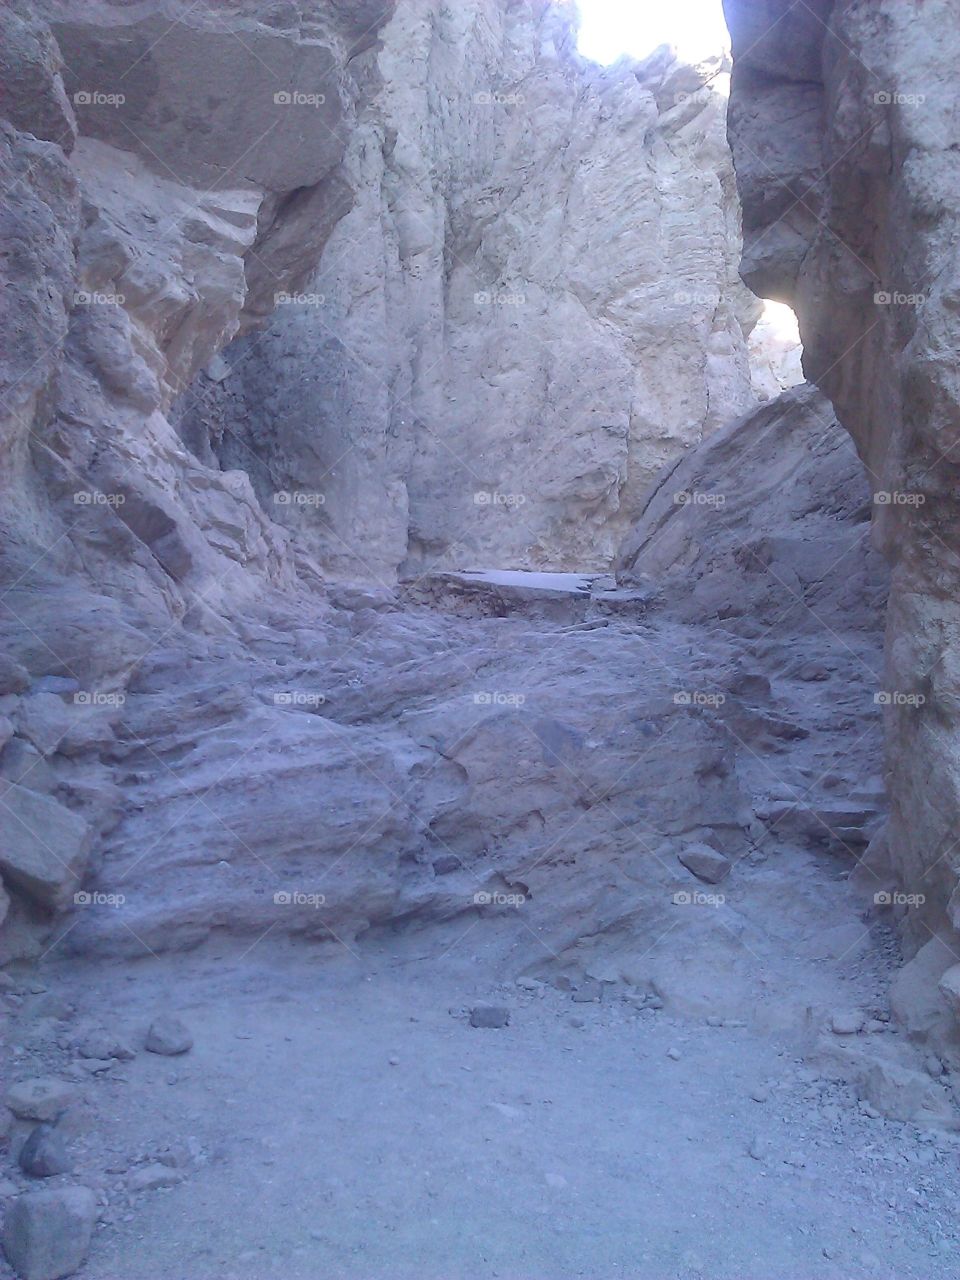 Pathway inside a Death Valley canyon.